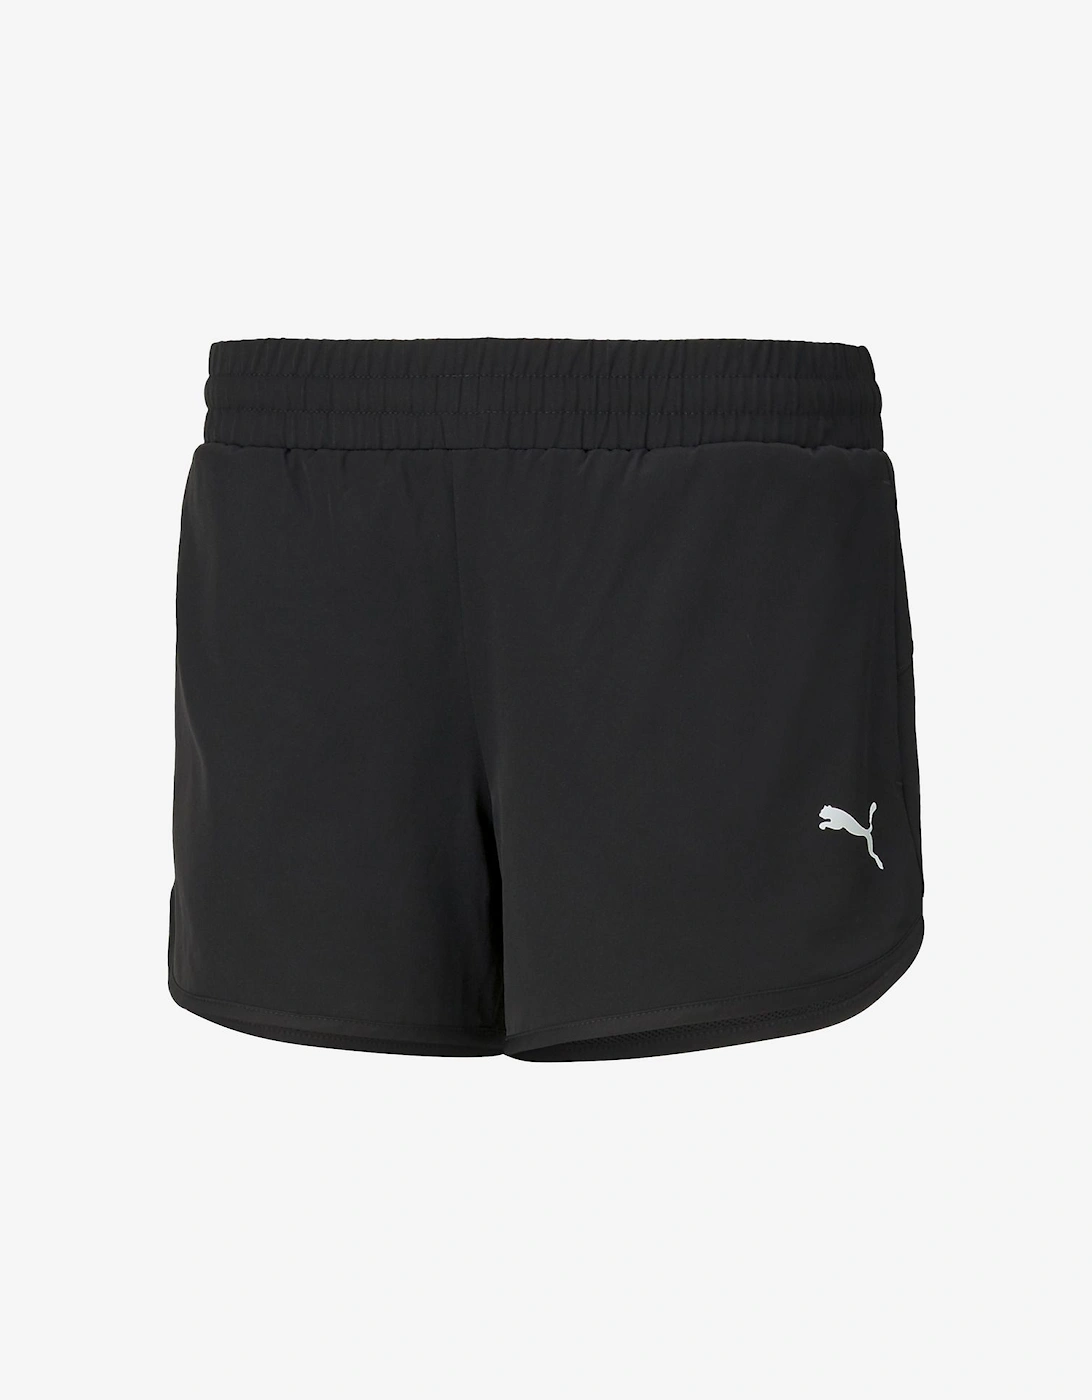 Women's Dry Cell Performance Woven Shorts